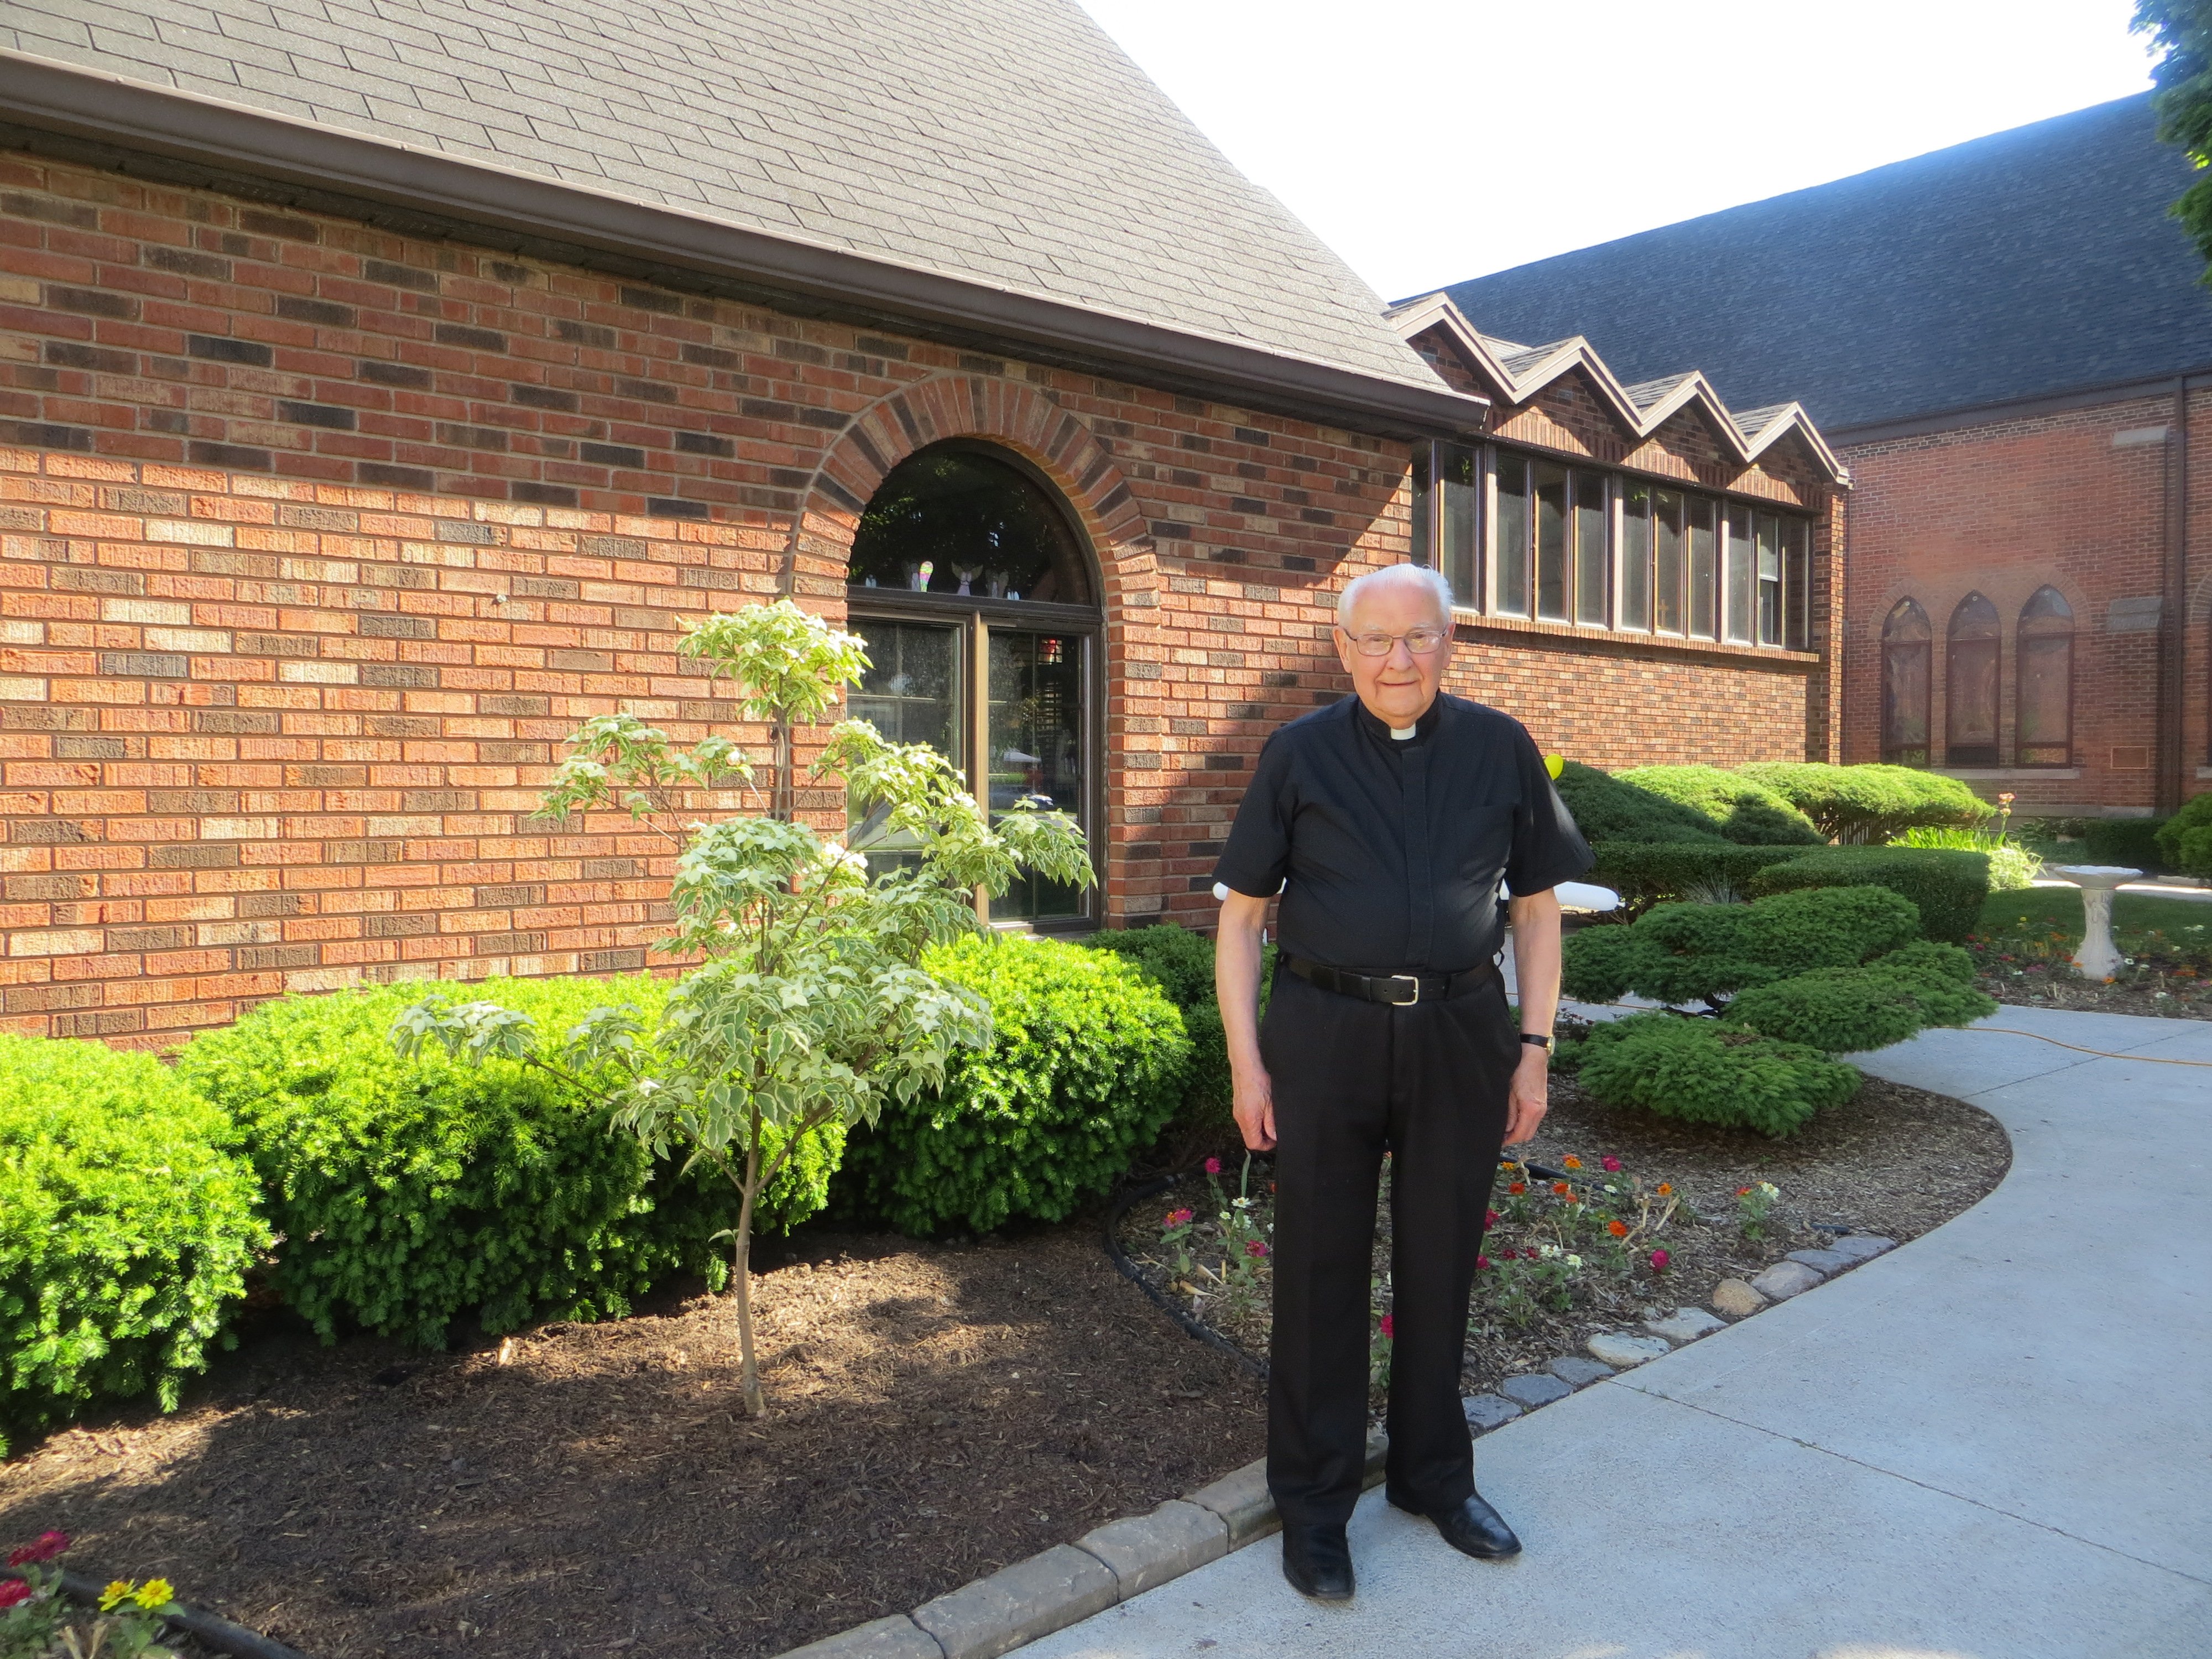 June 8th, 2020 - Archdeacon Ron beside the Samaritan Dogwood planted in honour of his 90th birthday